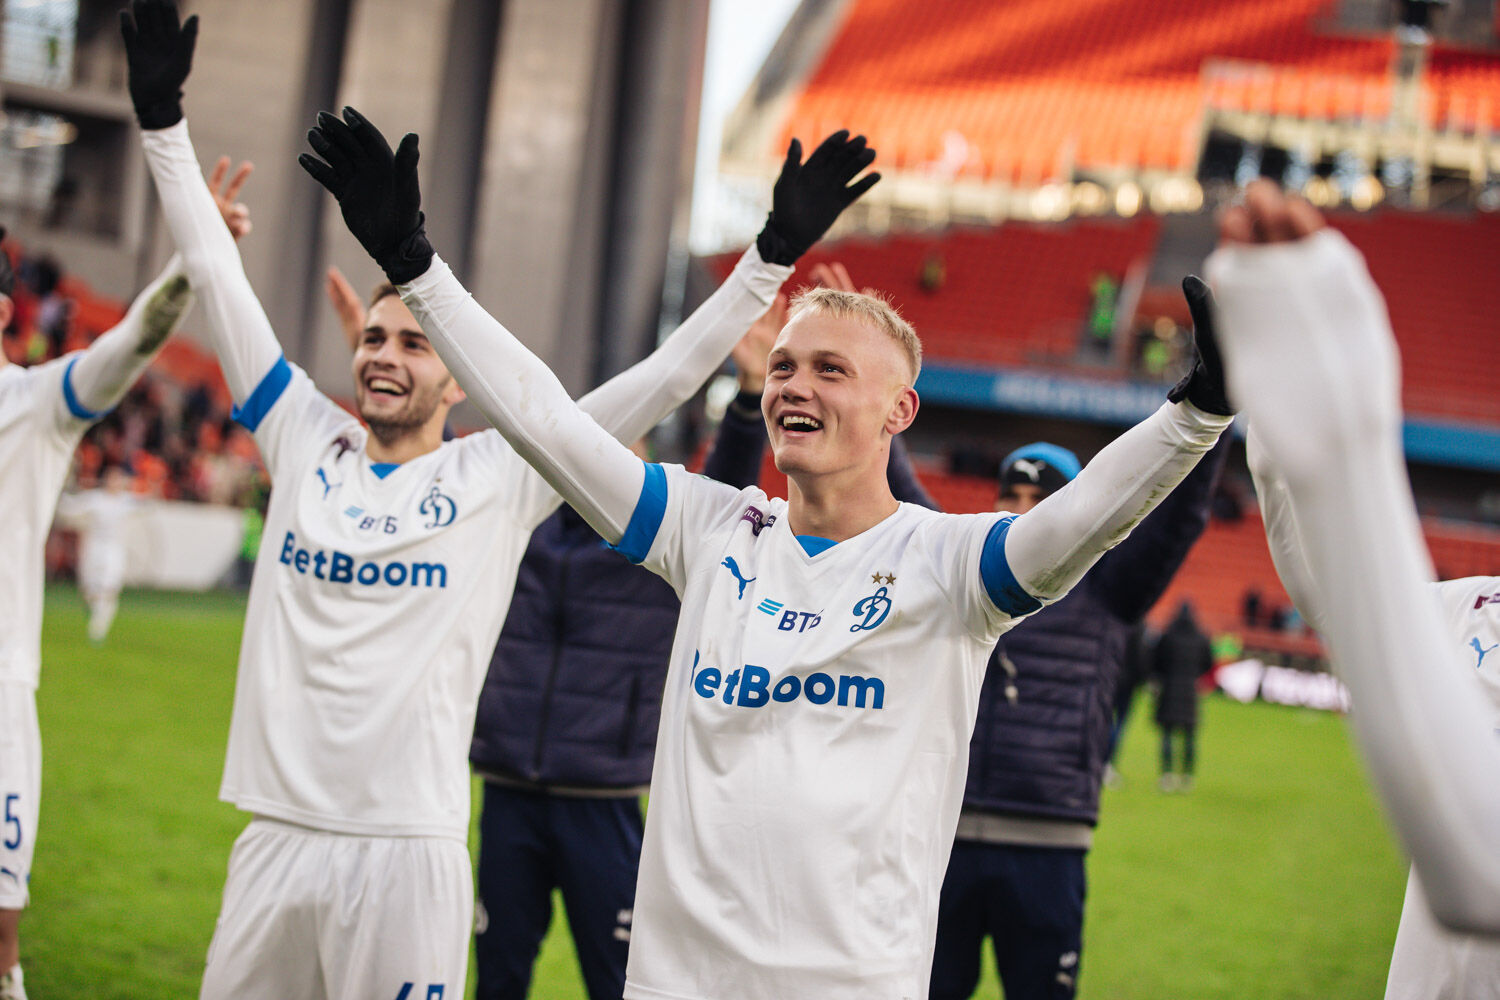 Photo gallery from away game against Ural